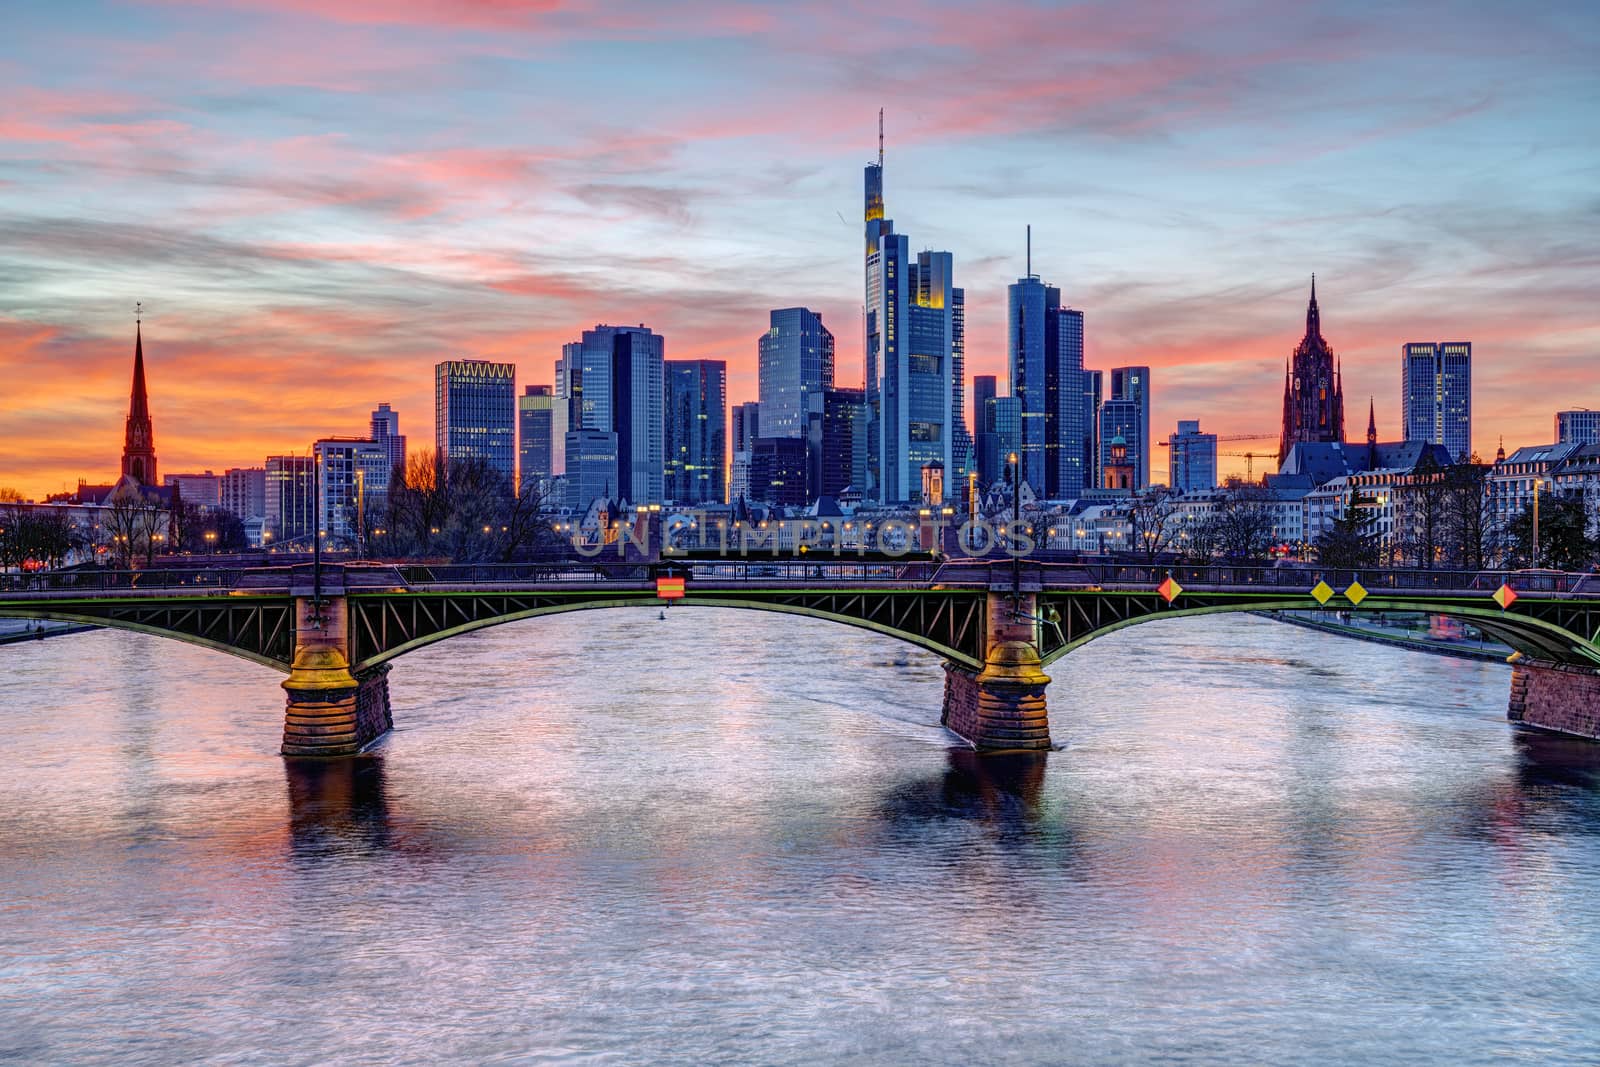 The financial district in Frankfurt in Germany and the Main river after sunset